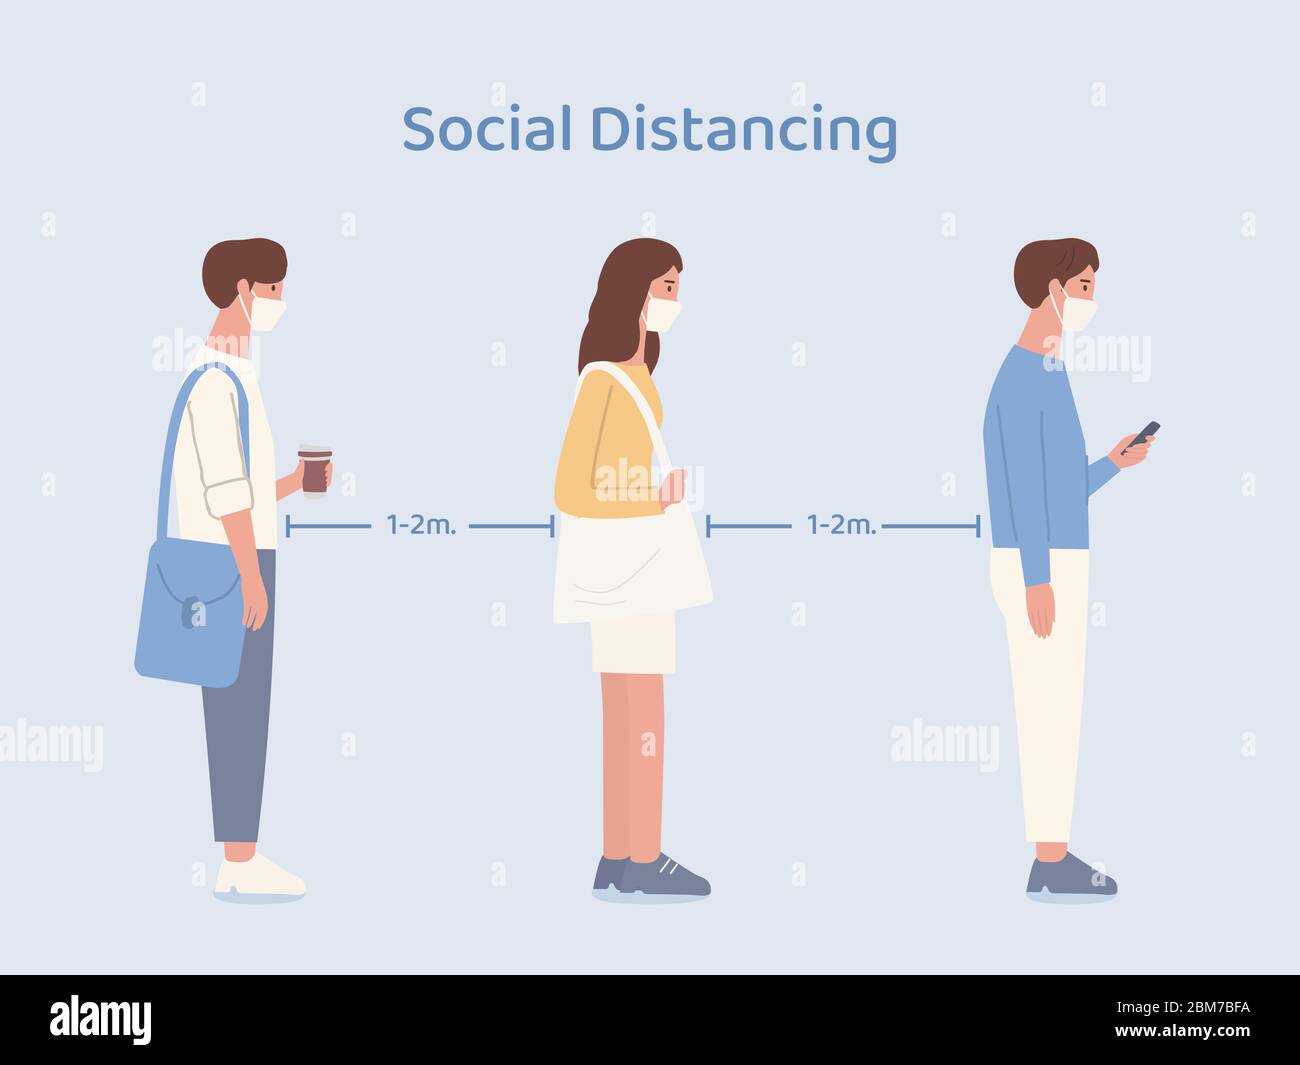 People wearing a mask doing social distancing while standing in queue in a community. Illustration about way to prevent Covid-19 spread. Stock Vector